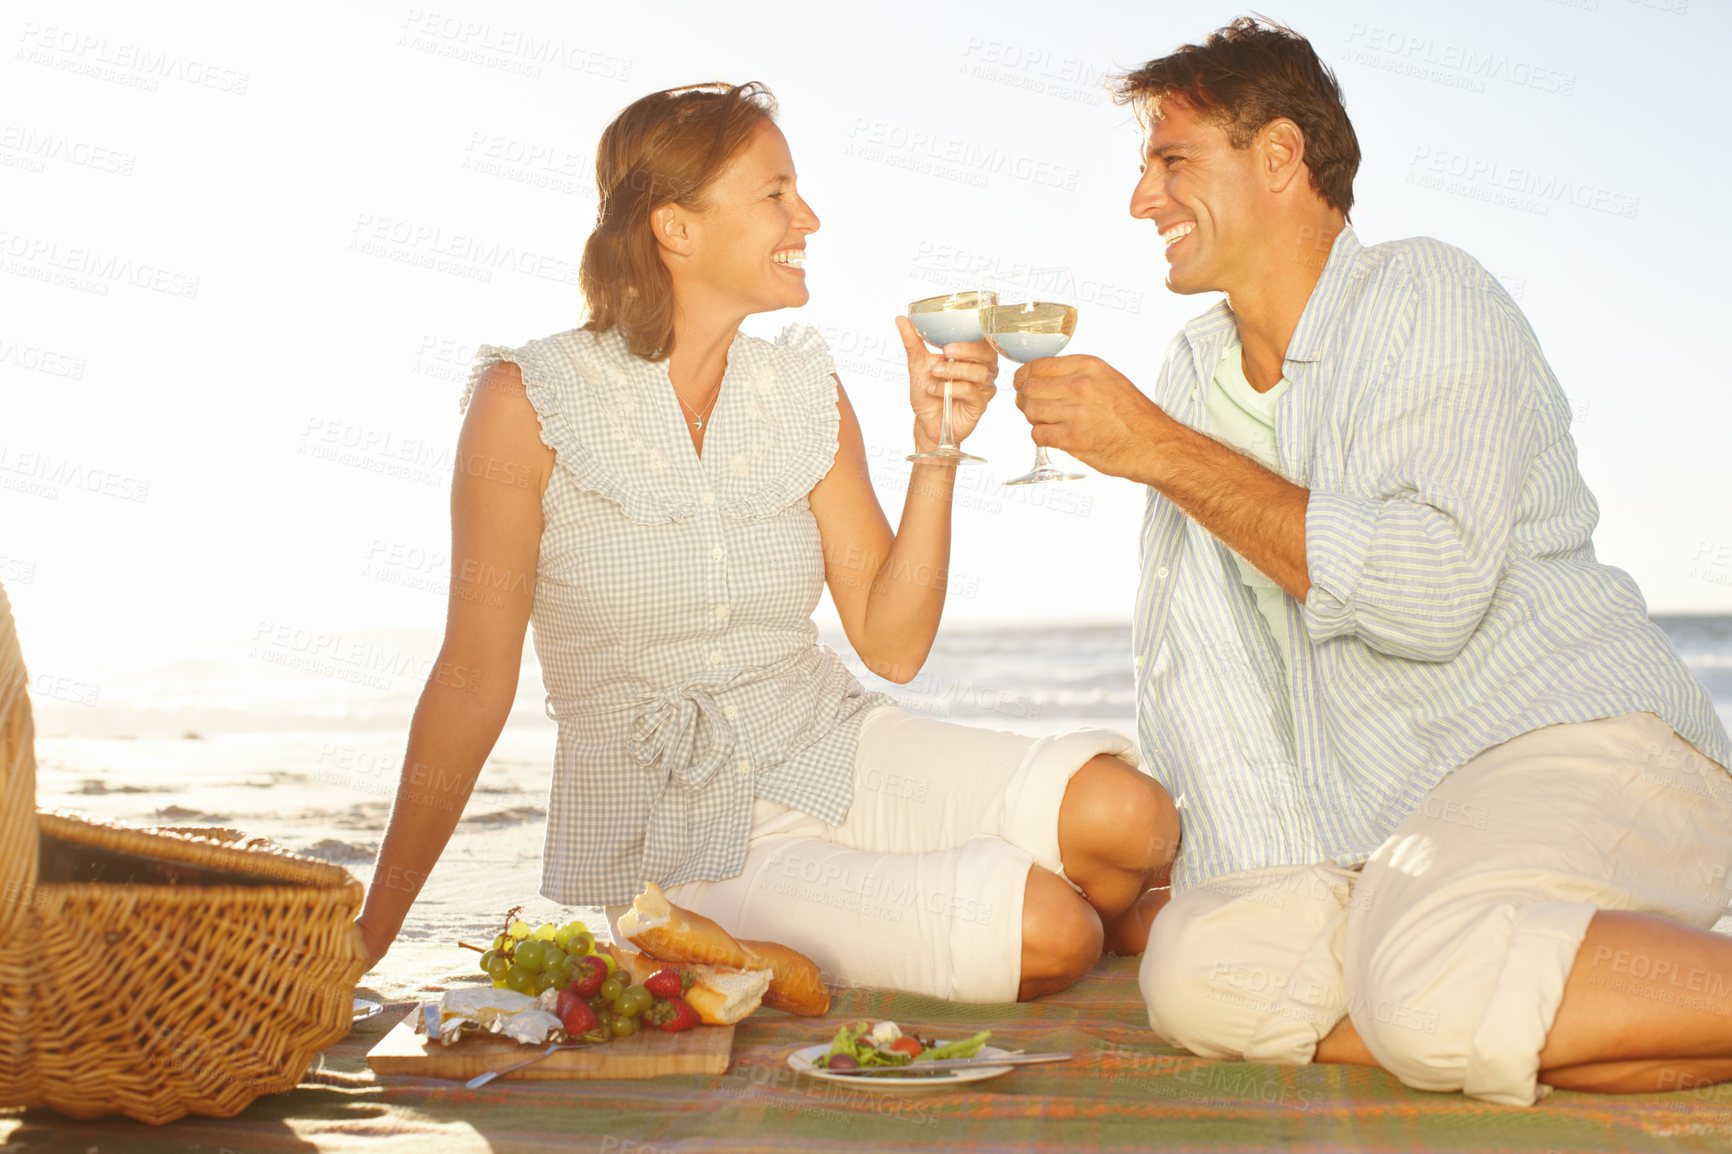 Buy stock photo A loving mature couple enjoying a romantic picnic on the beach together